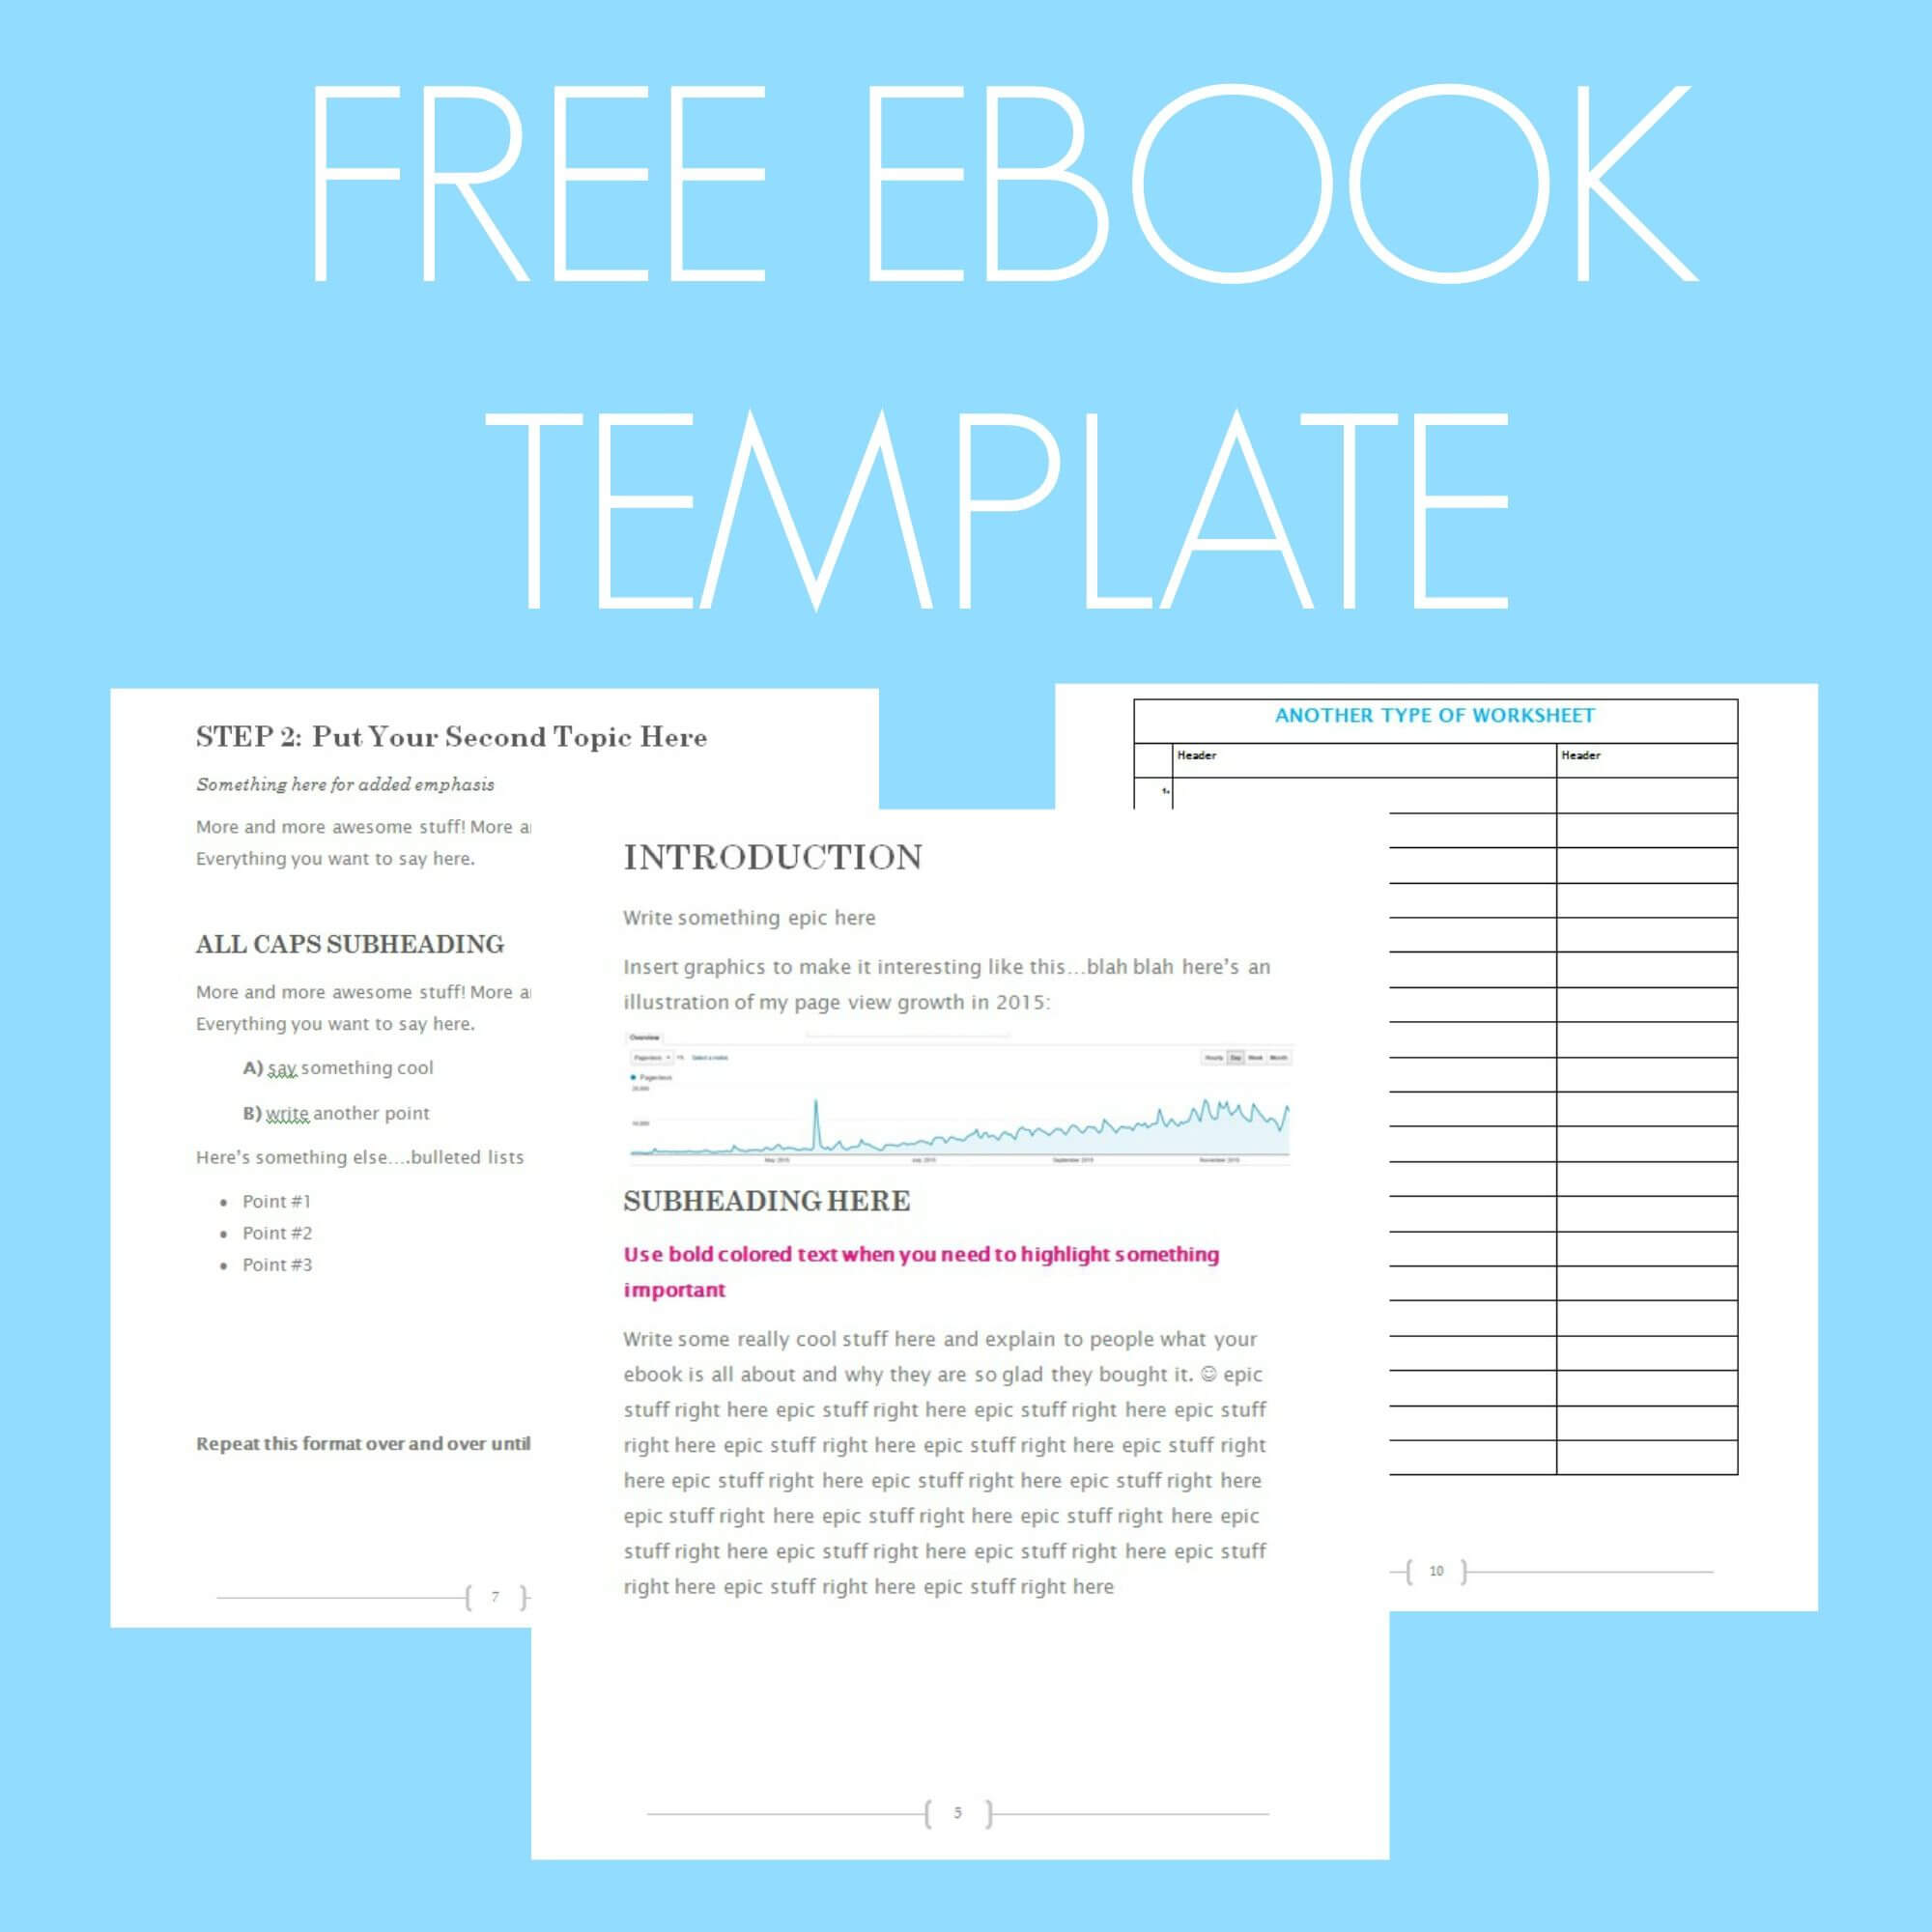 Free Ebook Template – Preformatted Word Document | Free Intended For Header Templates For Word